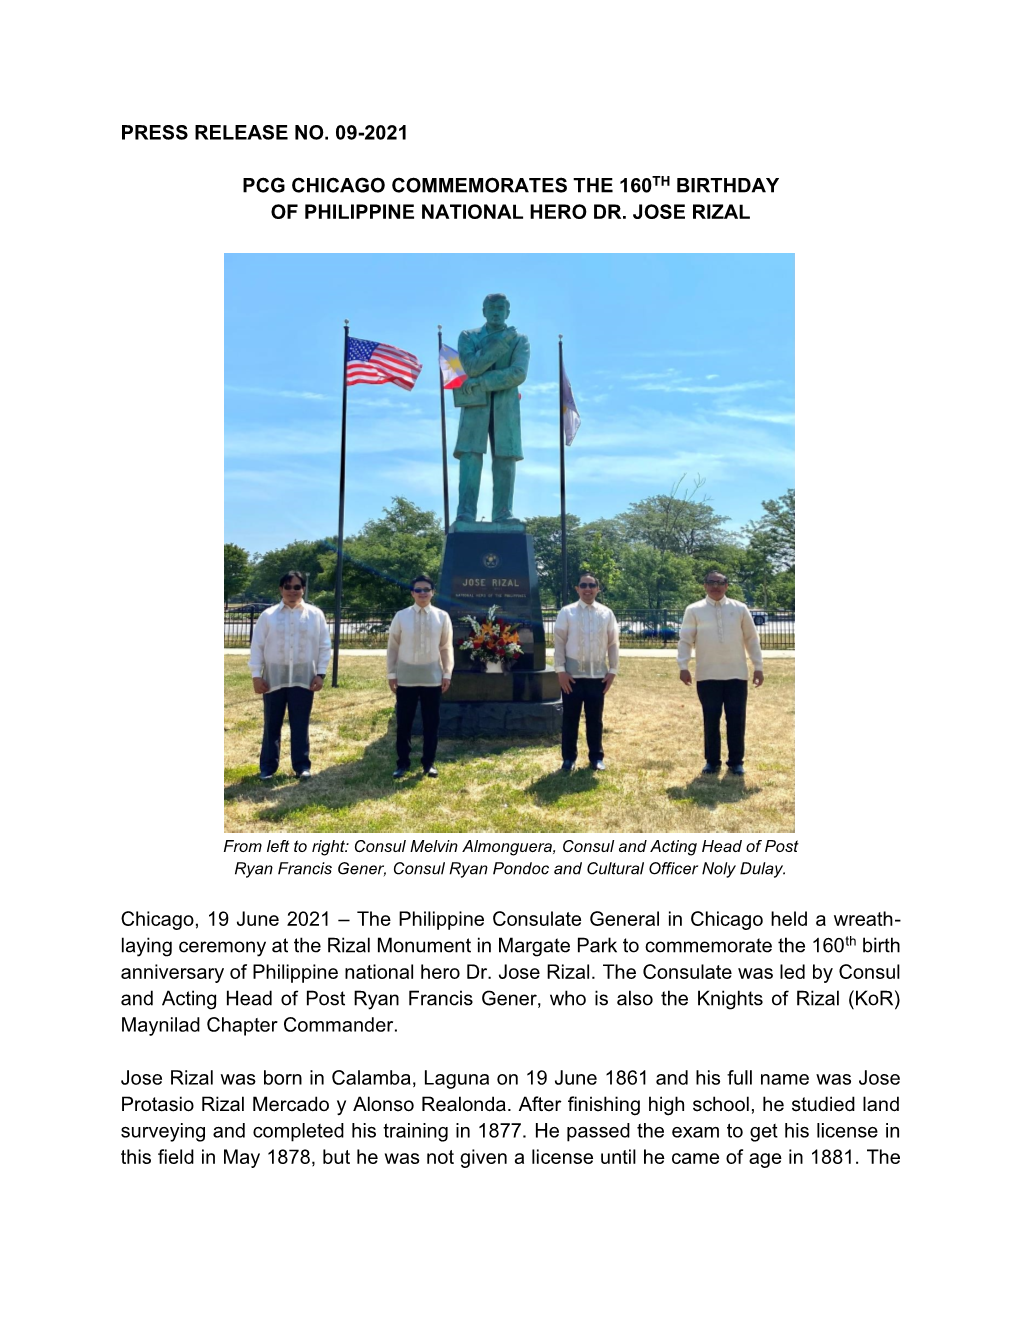 Pcg Chicago Commemorates the 160Th Birthday of Philippine National Hero Dr